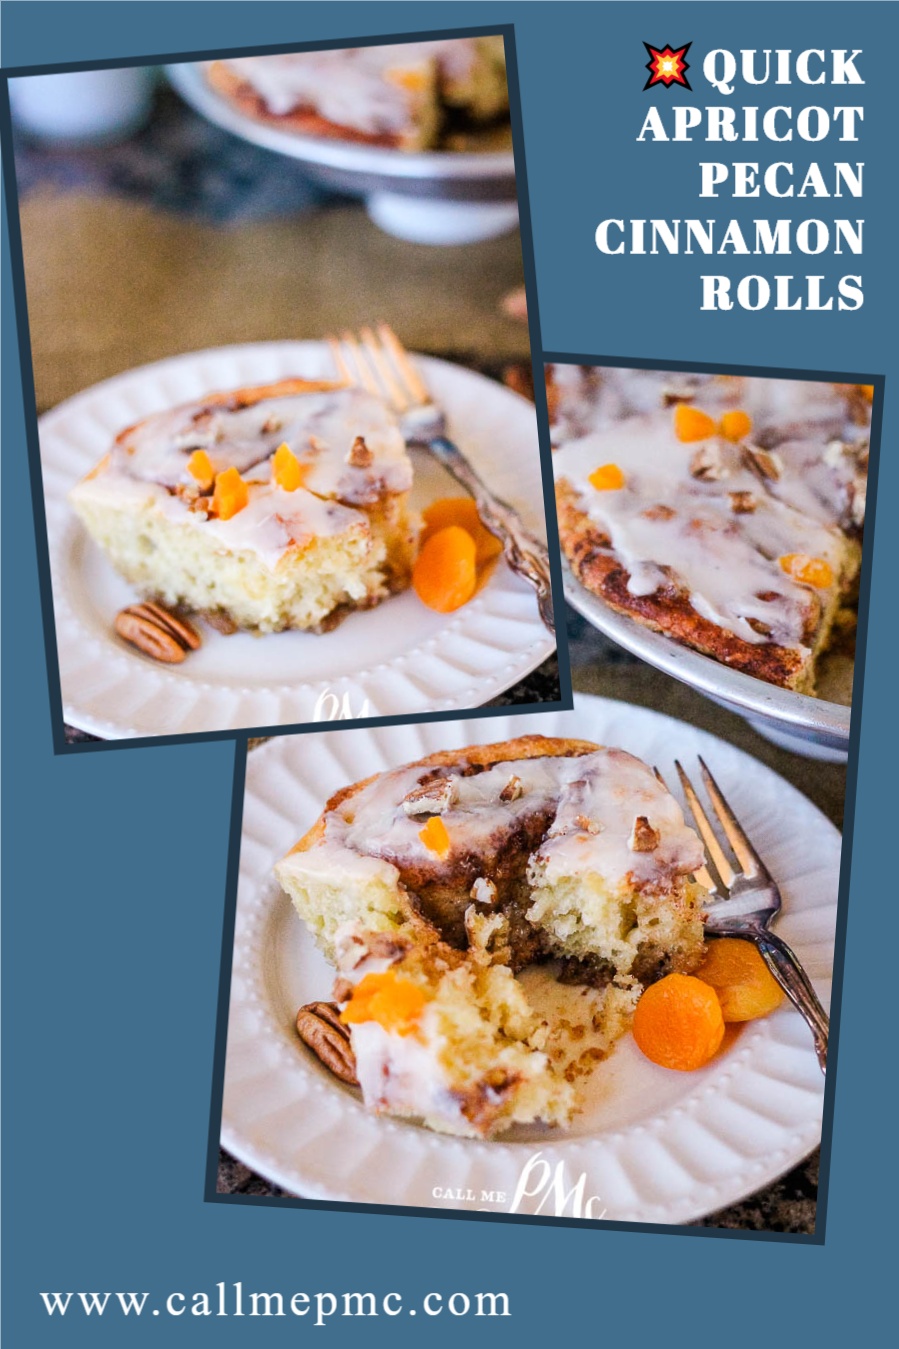 A quick-rise yeast dough makes these Quick Apricot Pecan Cinnamon Rolls a mouth-watering breakfast treat. #yeast #bread #cinnamon #cinnamonrolls #Cinnabon #breakfast